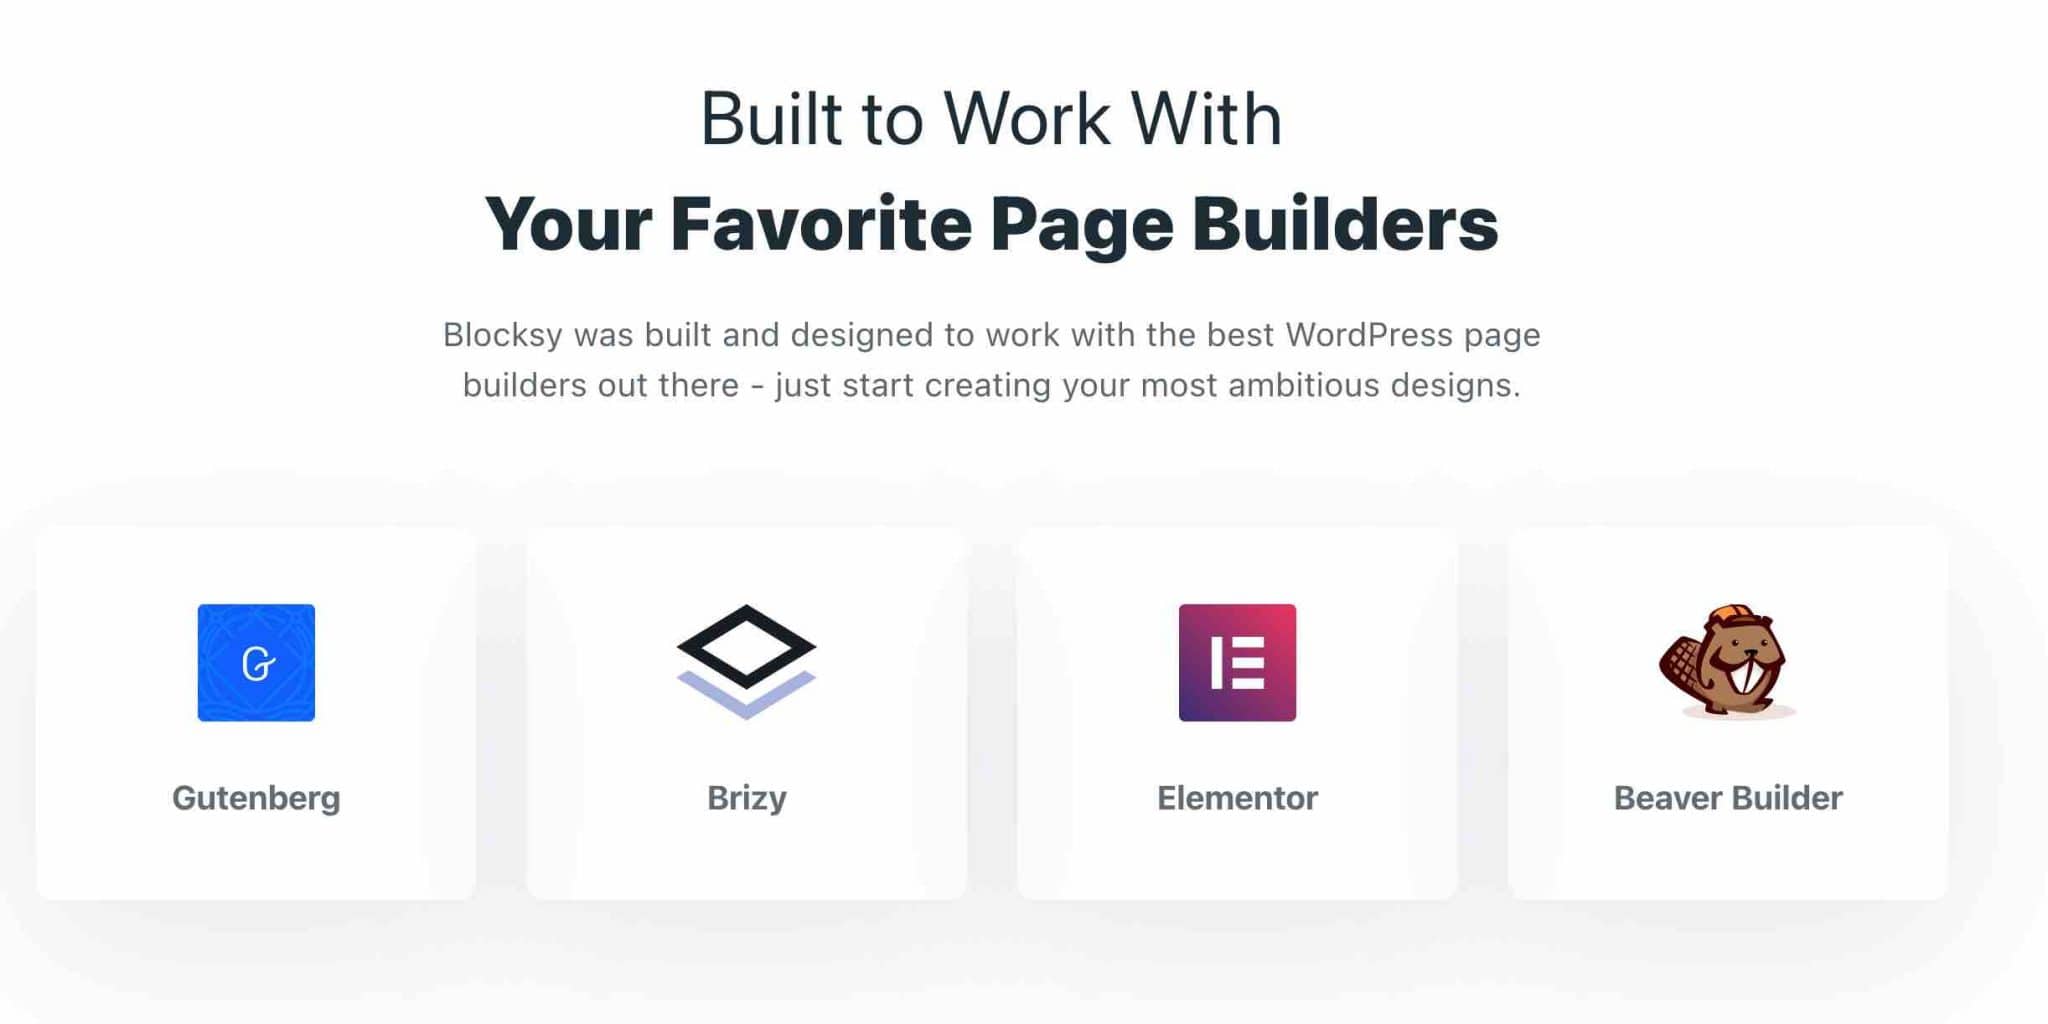 Blocksy built to work with your favorite page builders.